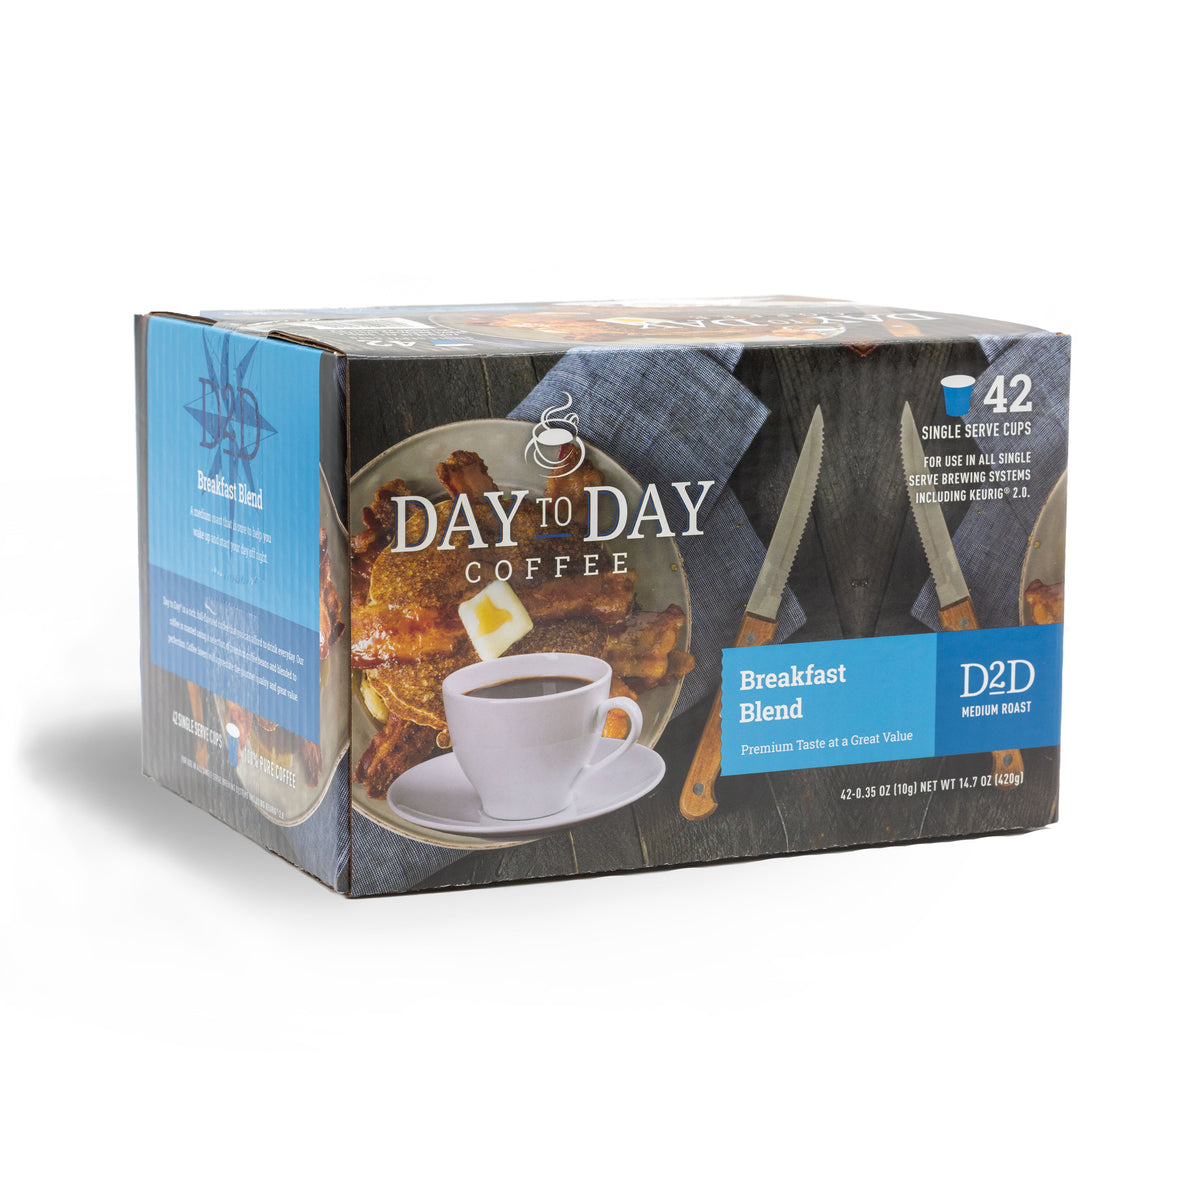 Day to day coffee 42 count breakfast blend medium roast coffee pods for single serve coffee brewer